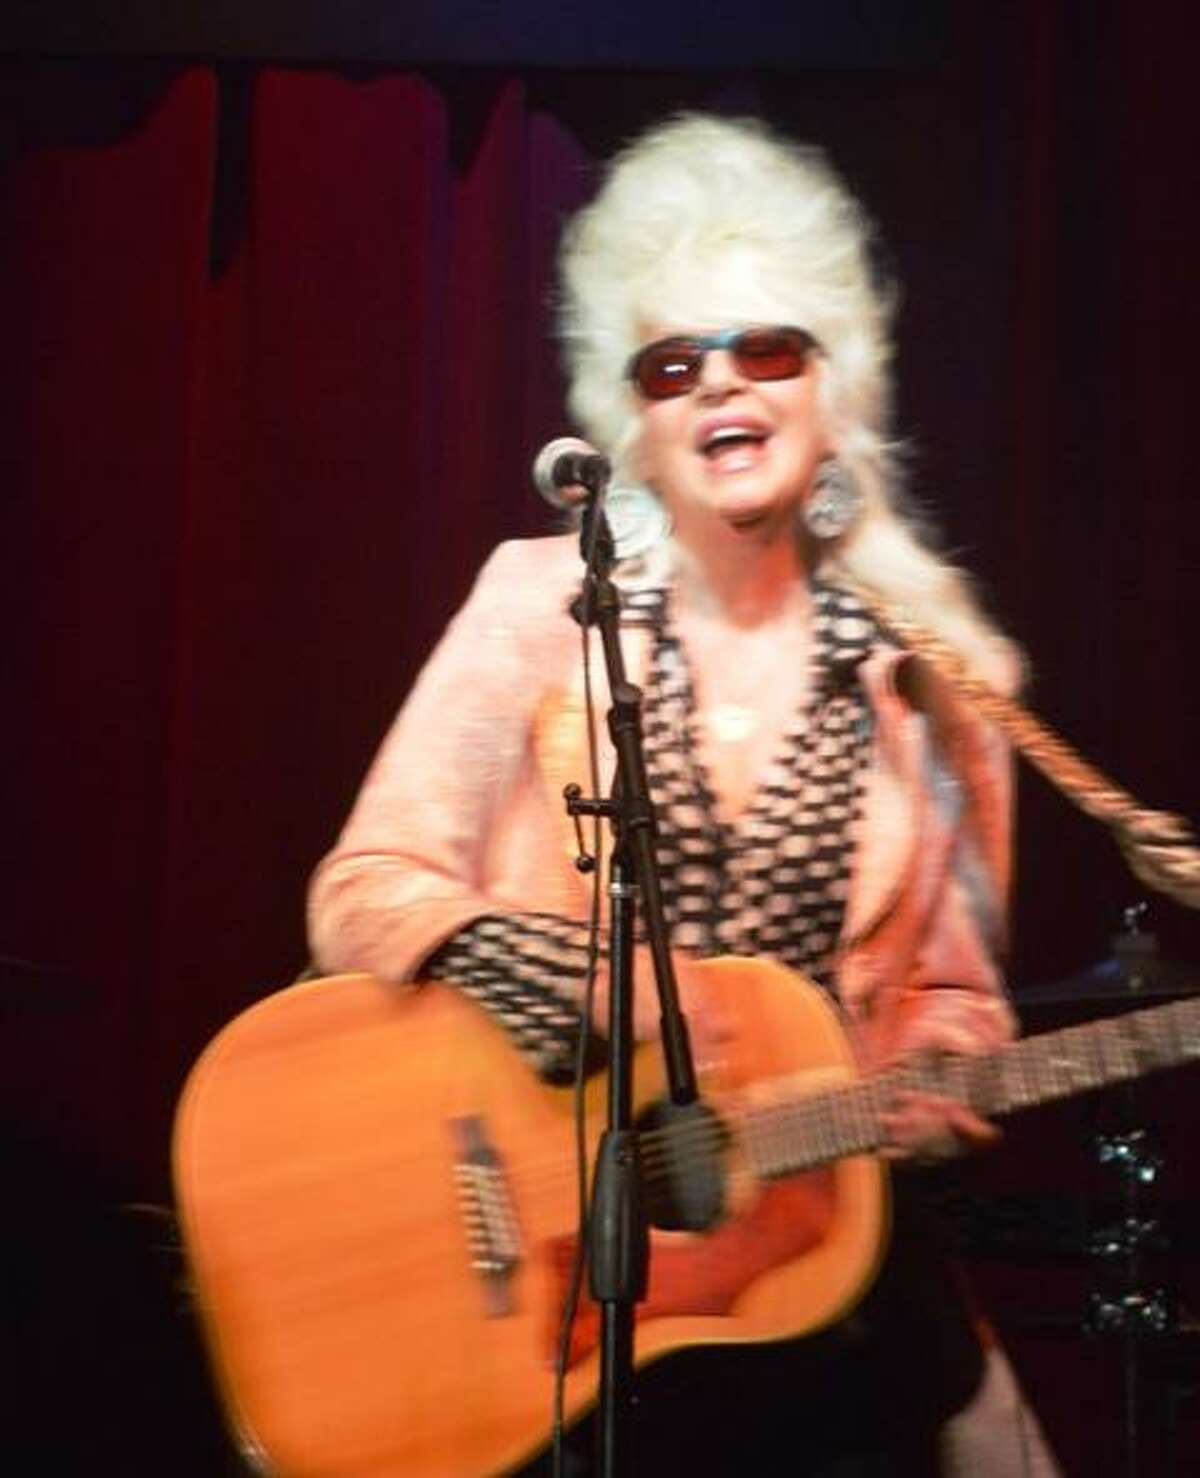 There'll be plenty of hip shakin’ at  Bridge Street Saturday with Christine Ohlman and Rebel Montez.